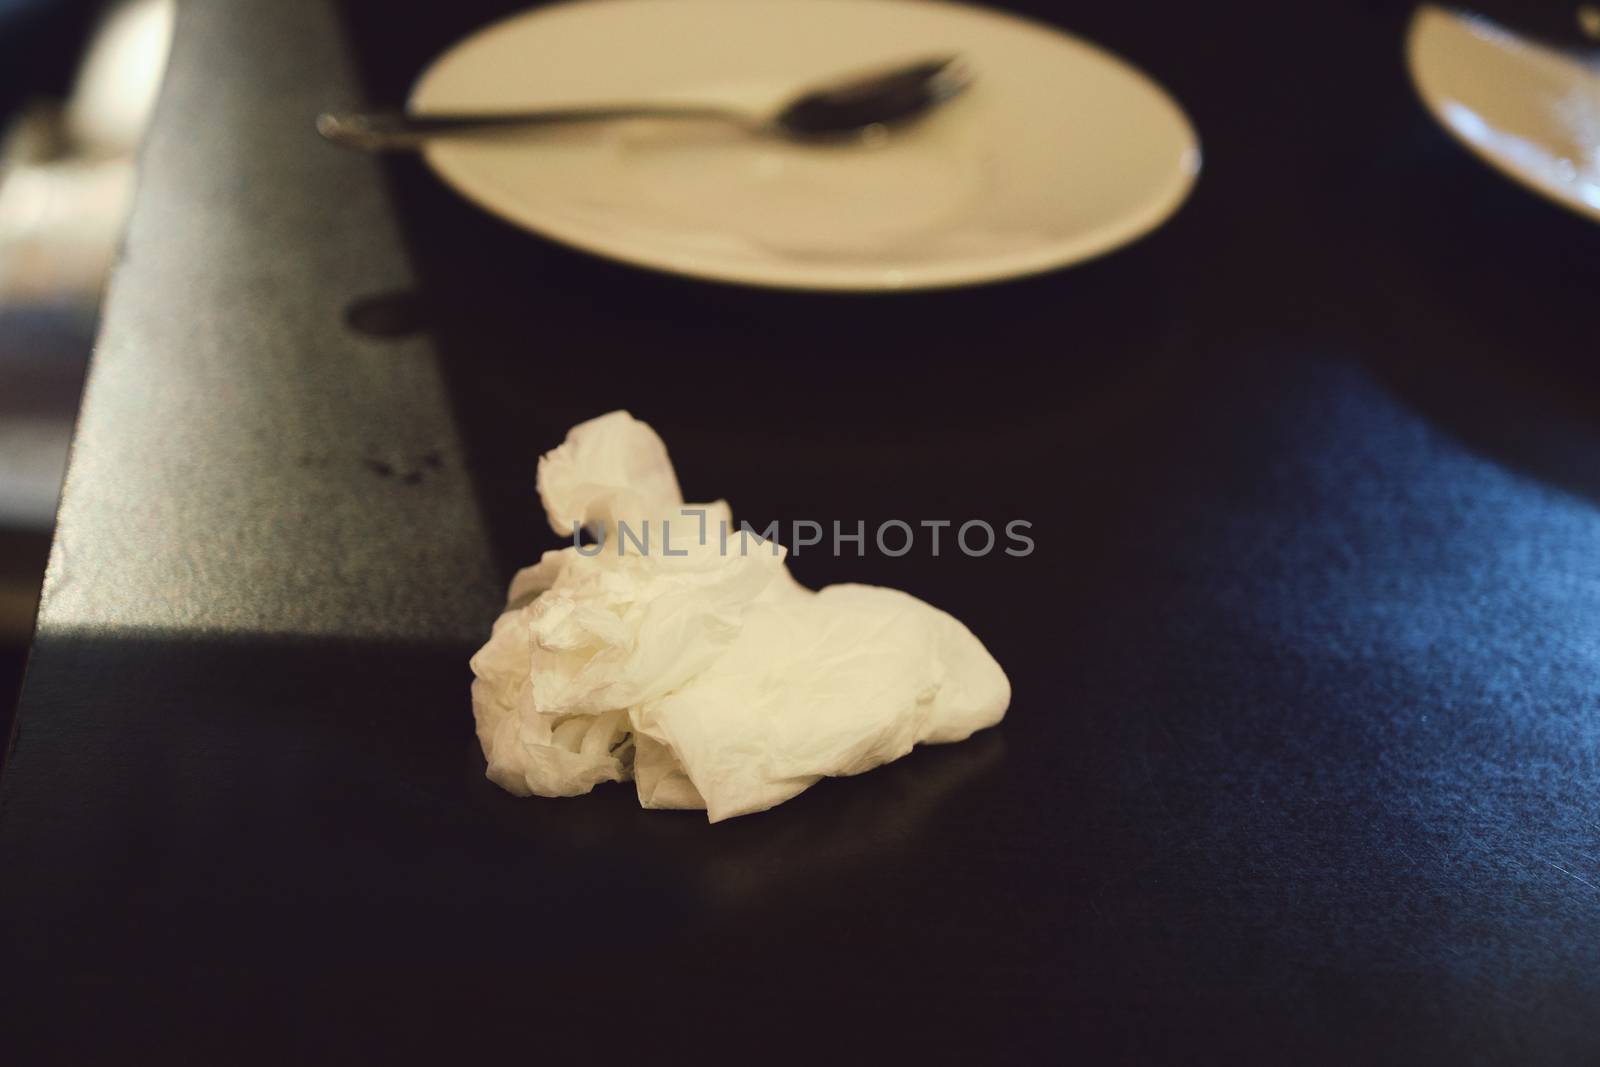 The Crumpled Tissue Paper Texture after use for cold and flu season or cleaning concept, placed on wooden table, closeup with blurred background